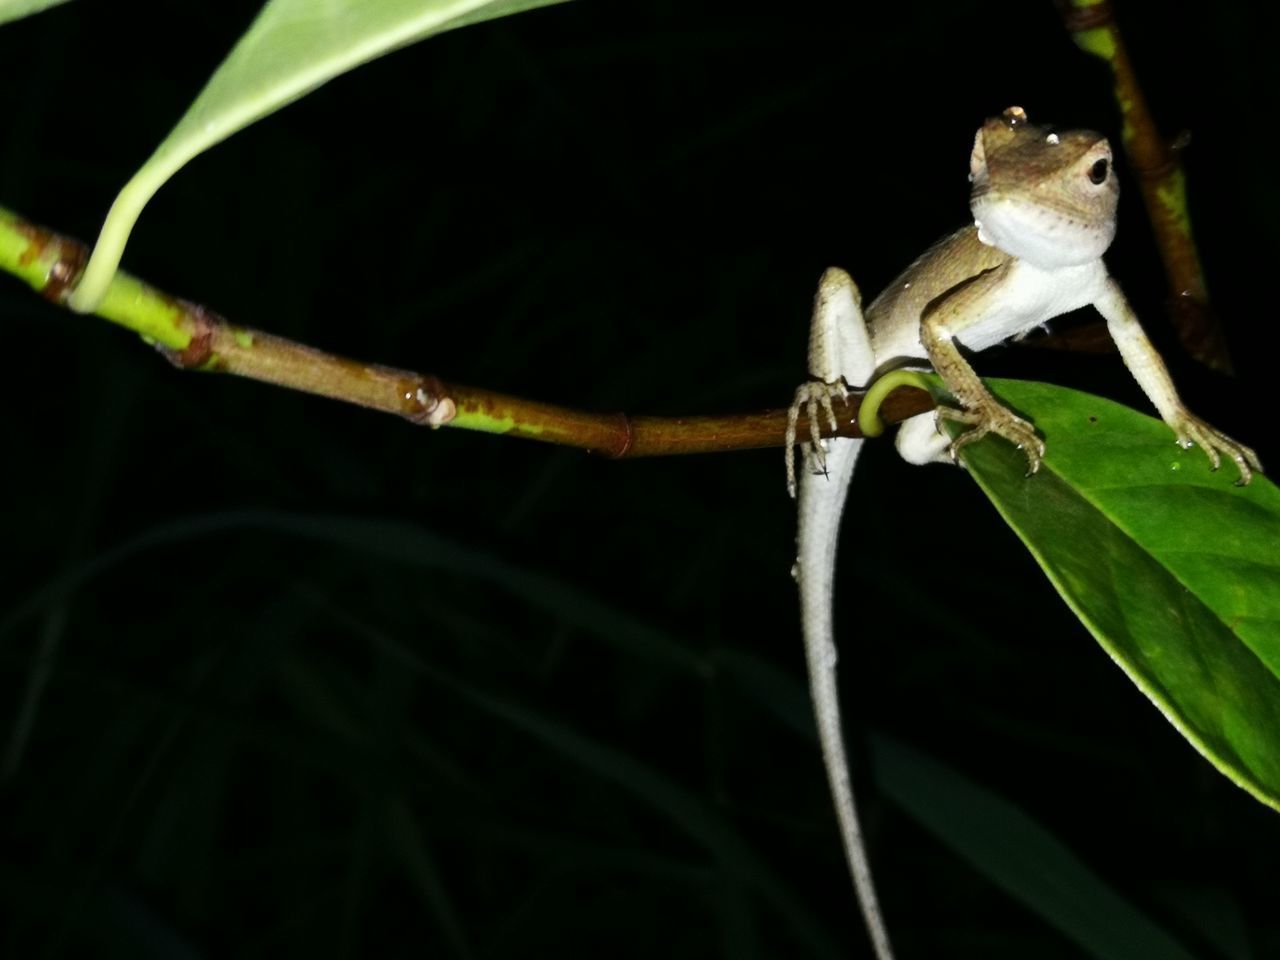 CLOSE-UP OF A LIZARD ON PLANT